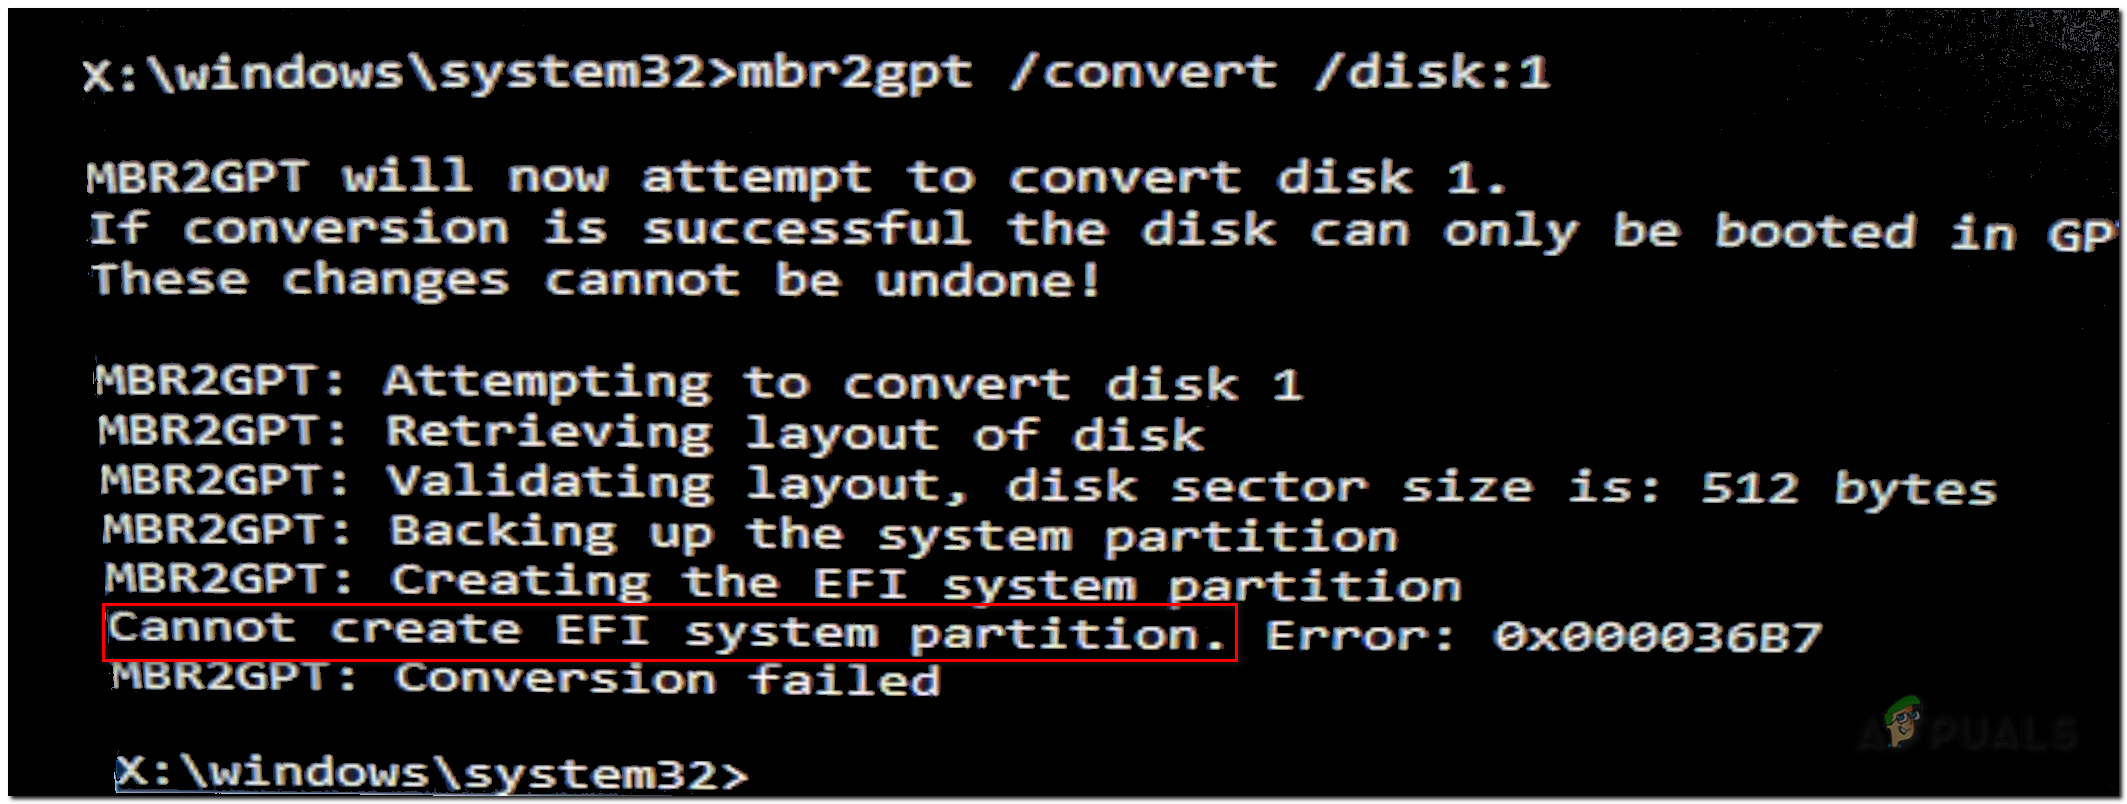 Cannot Create EFI System Partition